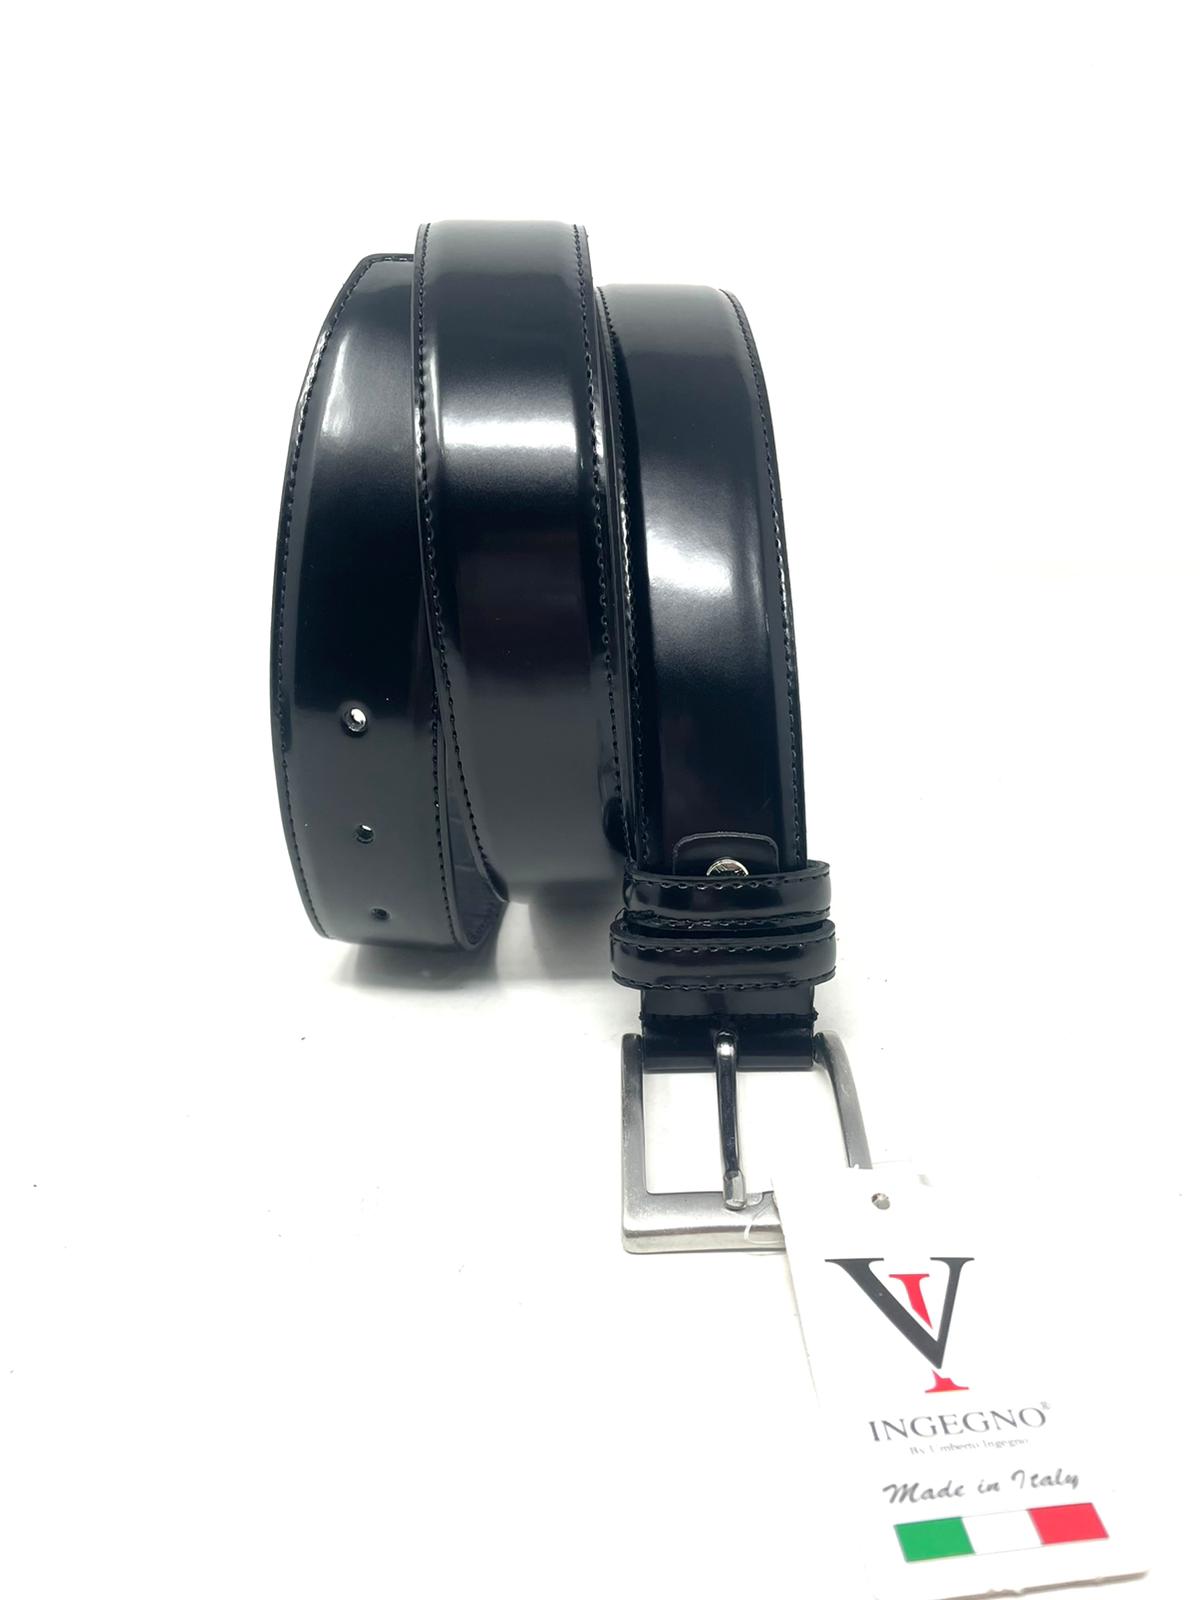 Genuine leather abrasive belt made in Italy